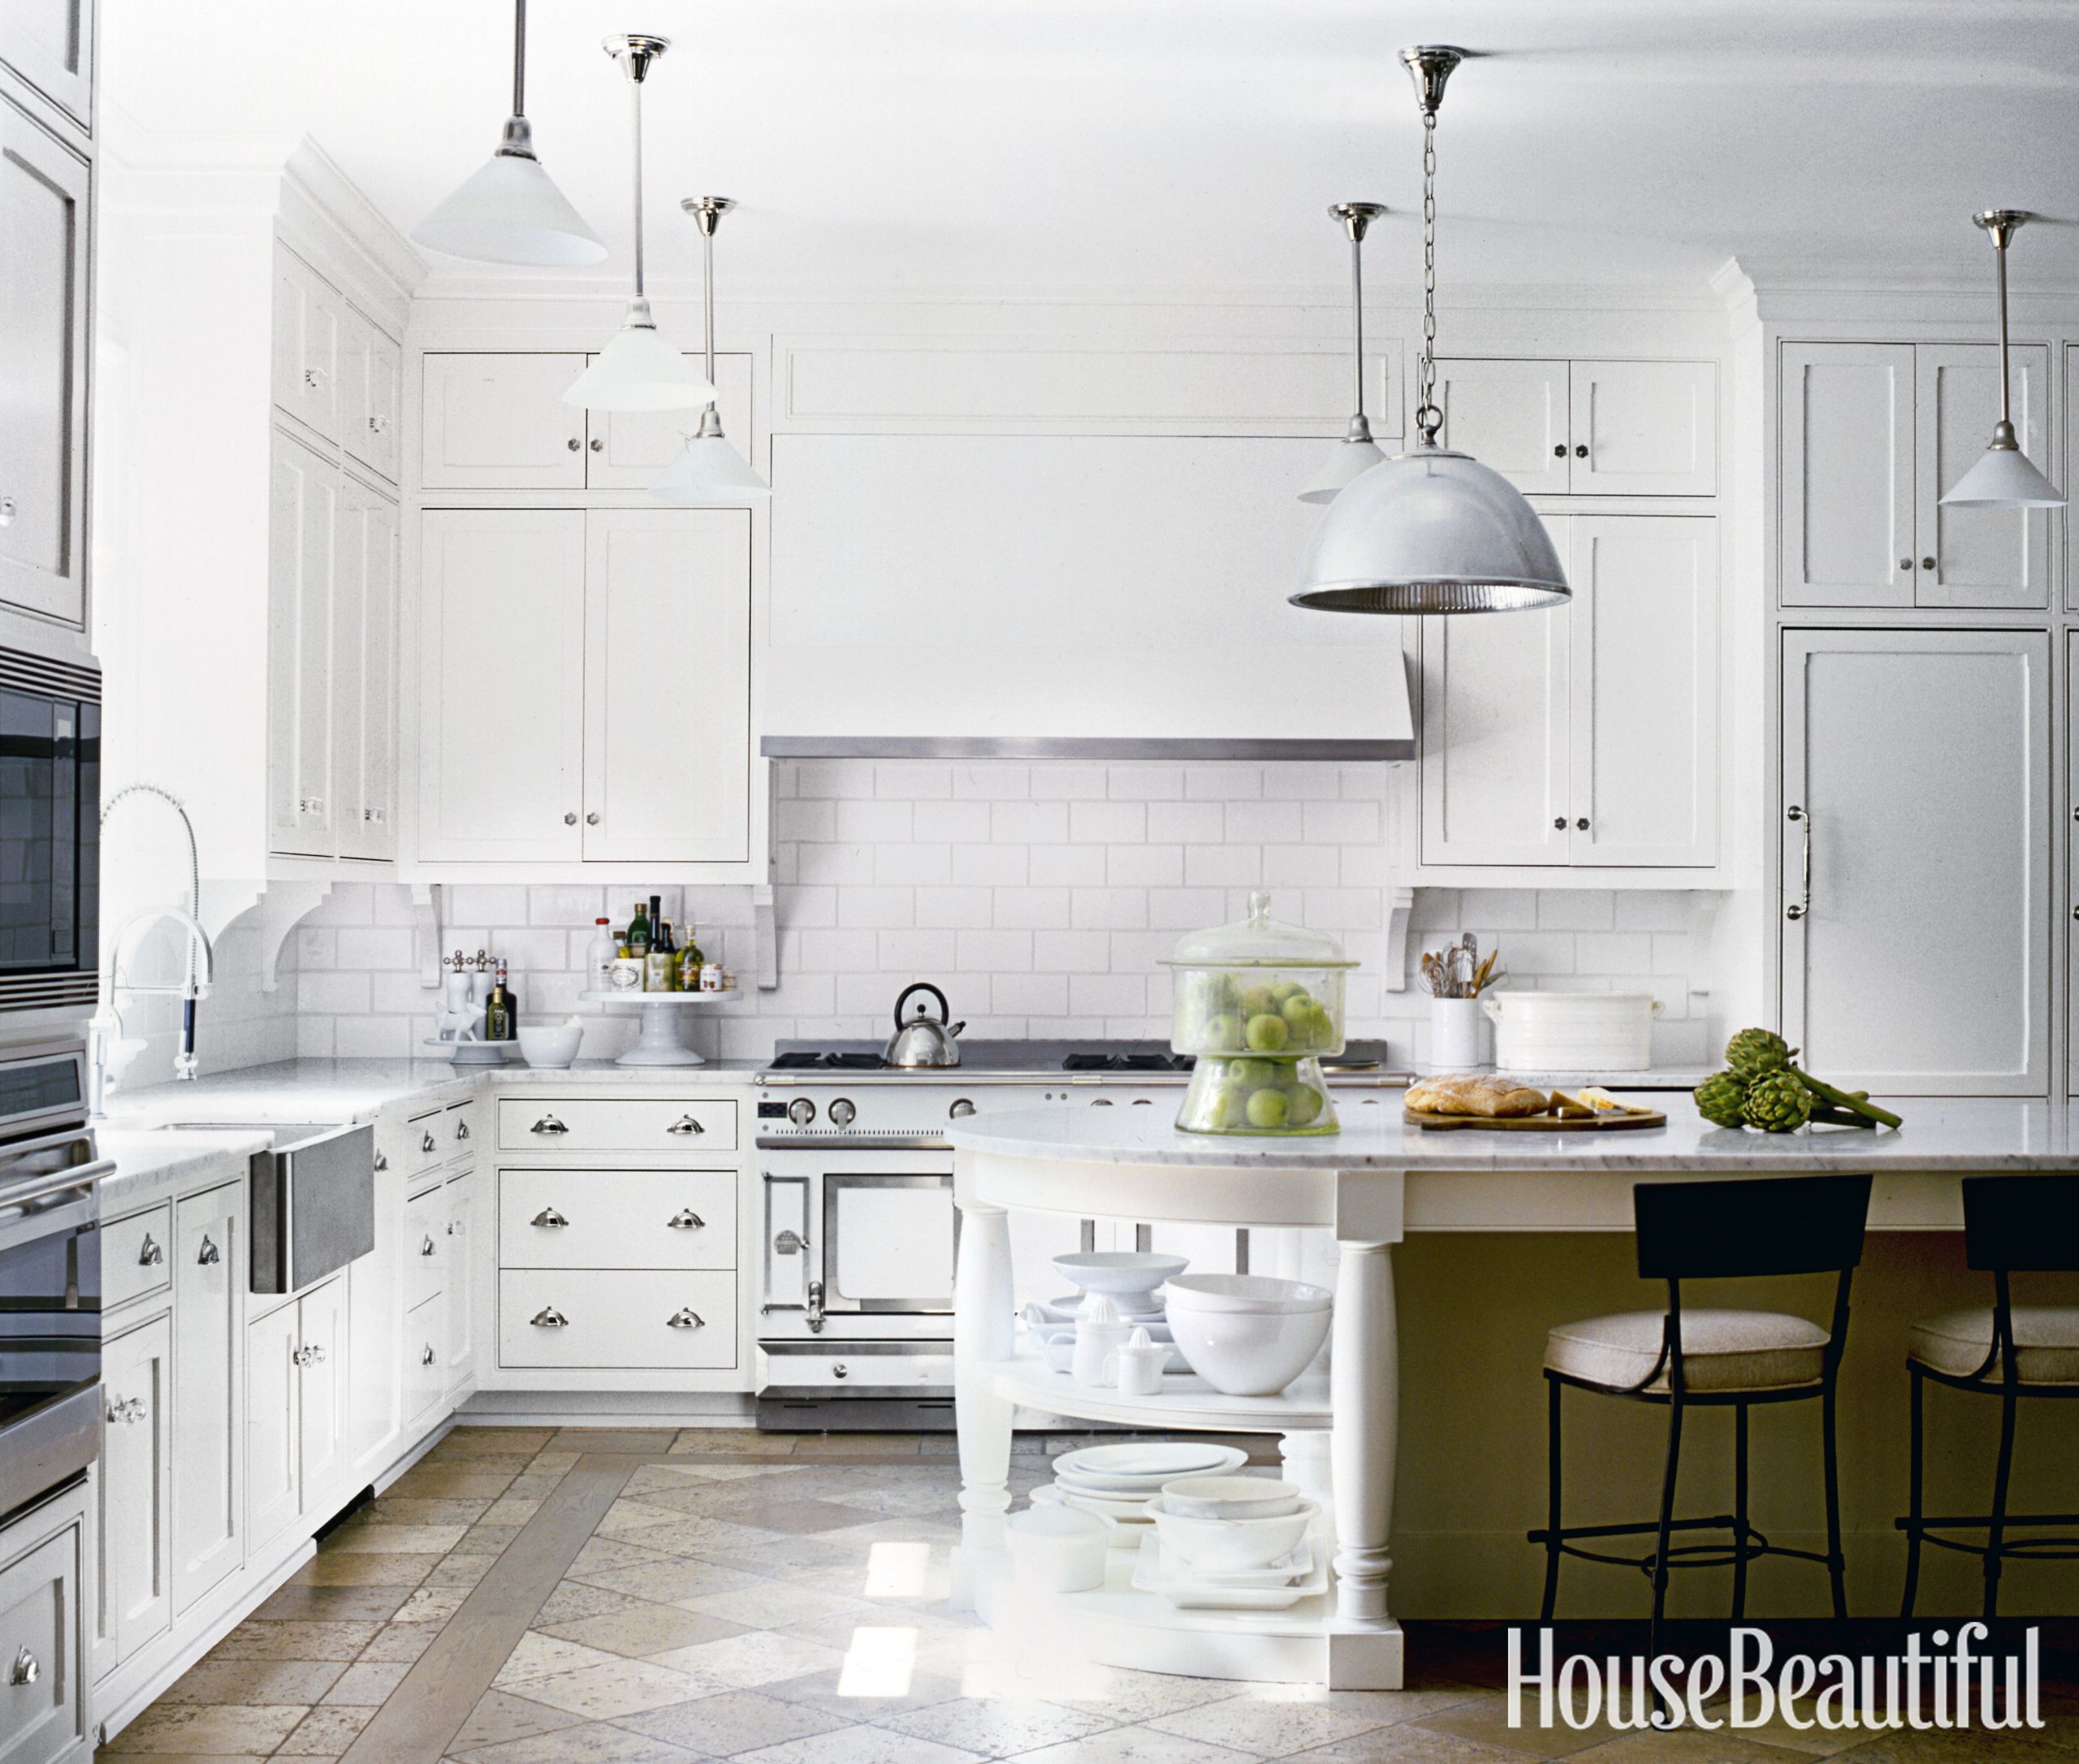 5 popular kitchen topics that can make
your kitchen look expensive